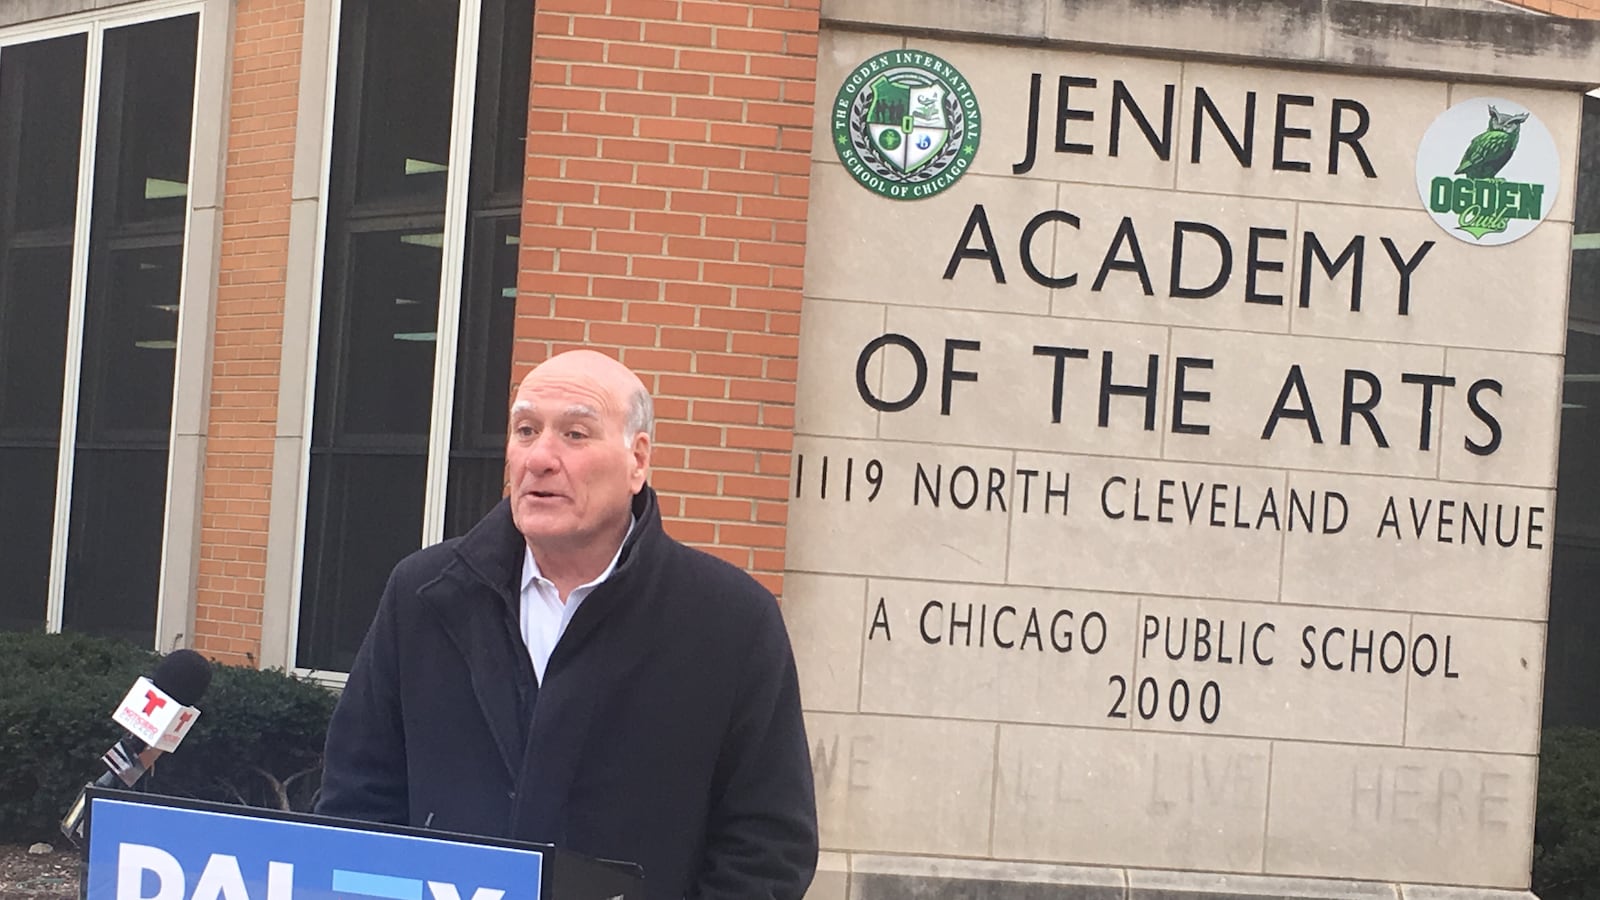 Bill Daley spoke outside Jenner School on Jan. 10 about his plan for "Neighborhood School Councils," which would replace the current system of Local School Councils.